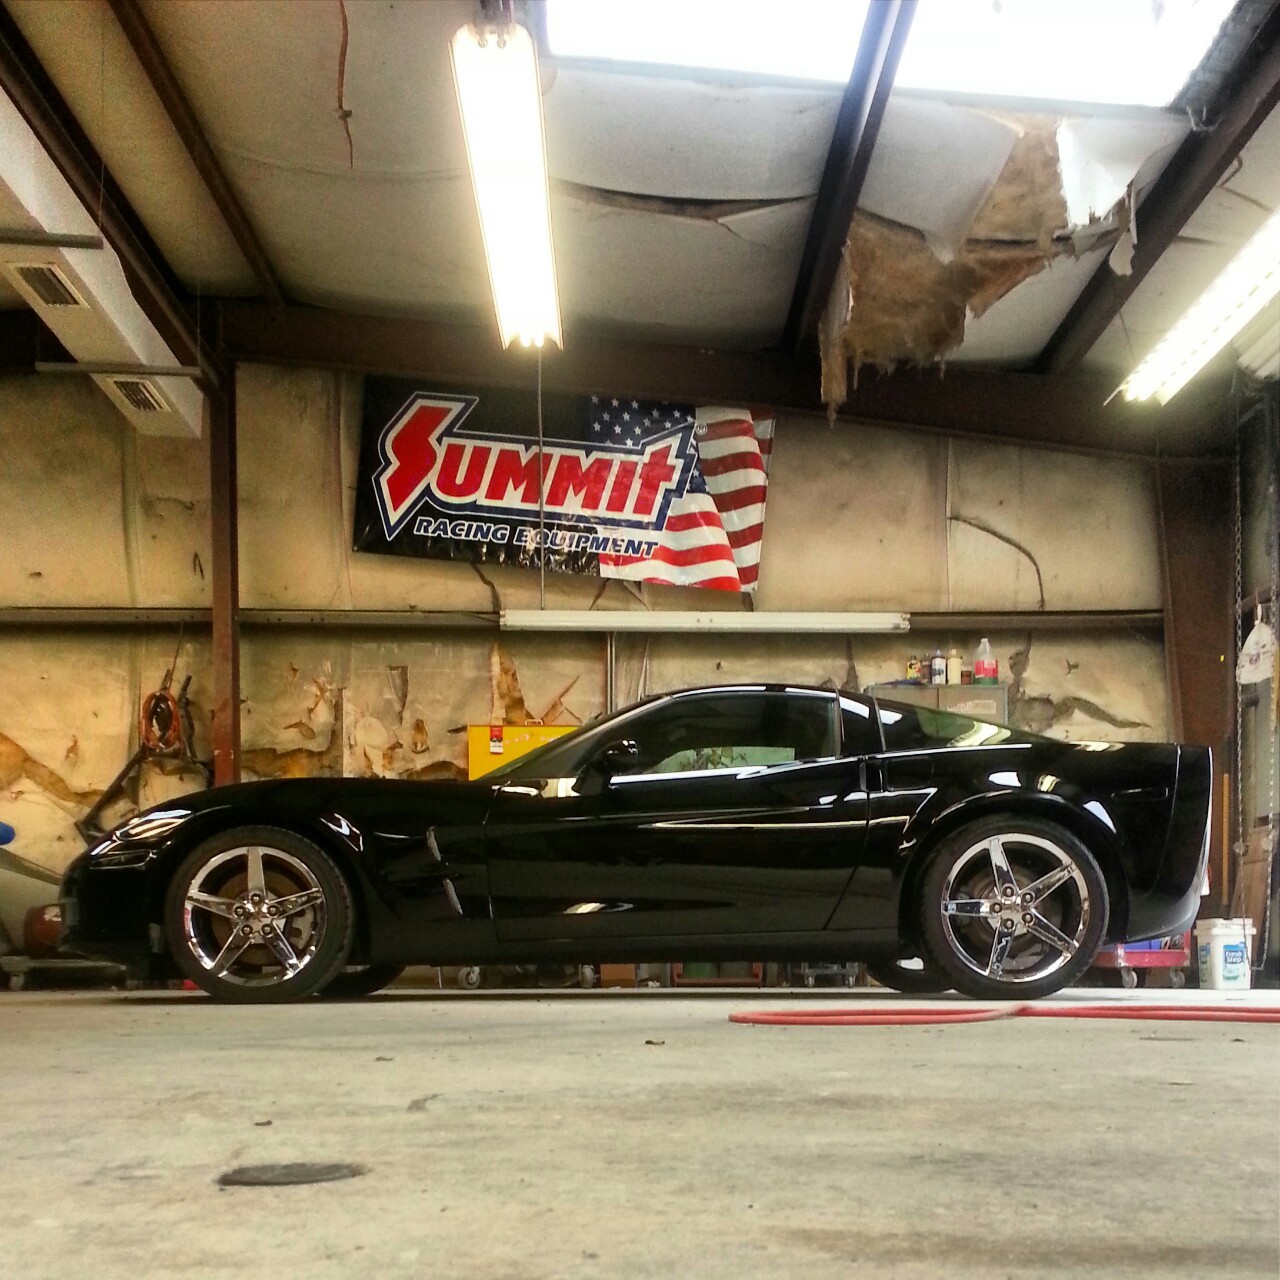 Corvette I painted and buffed to mirror shine this car was red lol sometimes I amaze